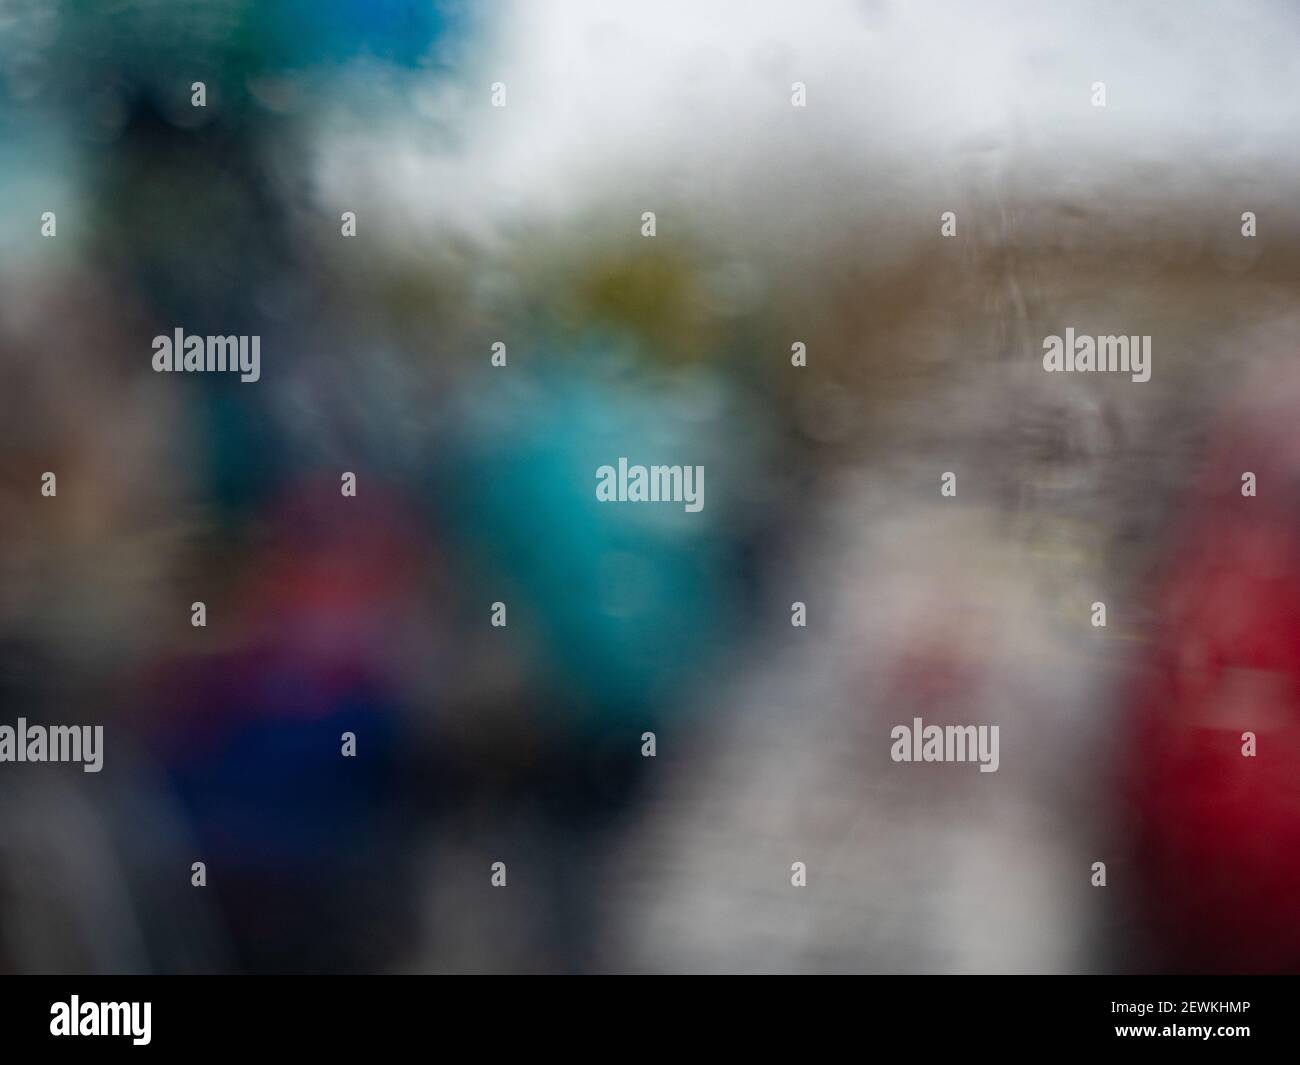 A soft, colourful abstract image. Stock Photo